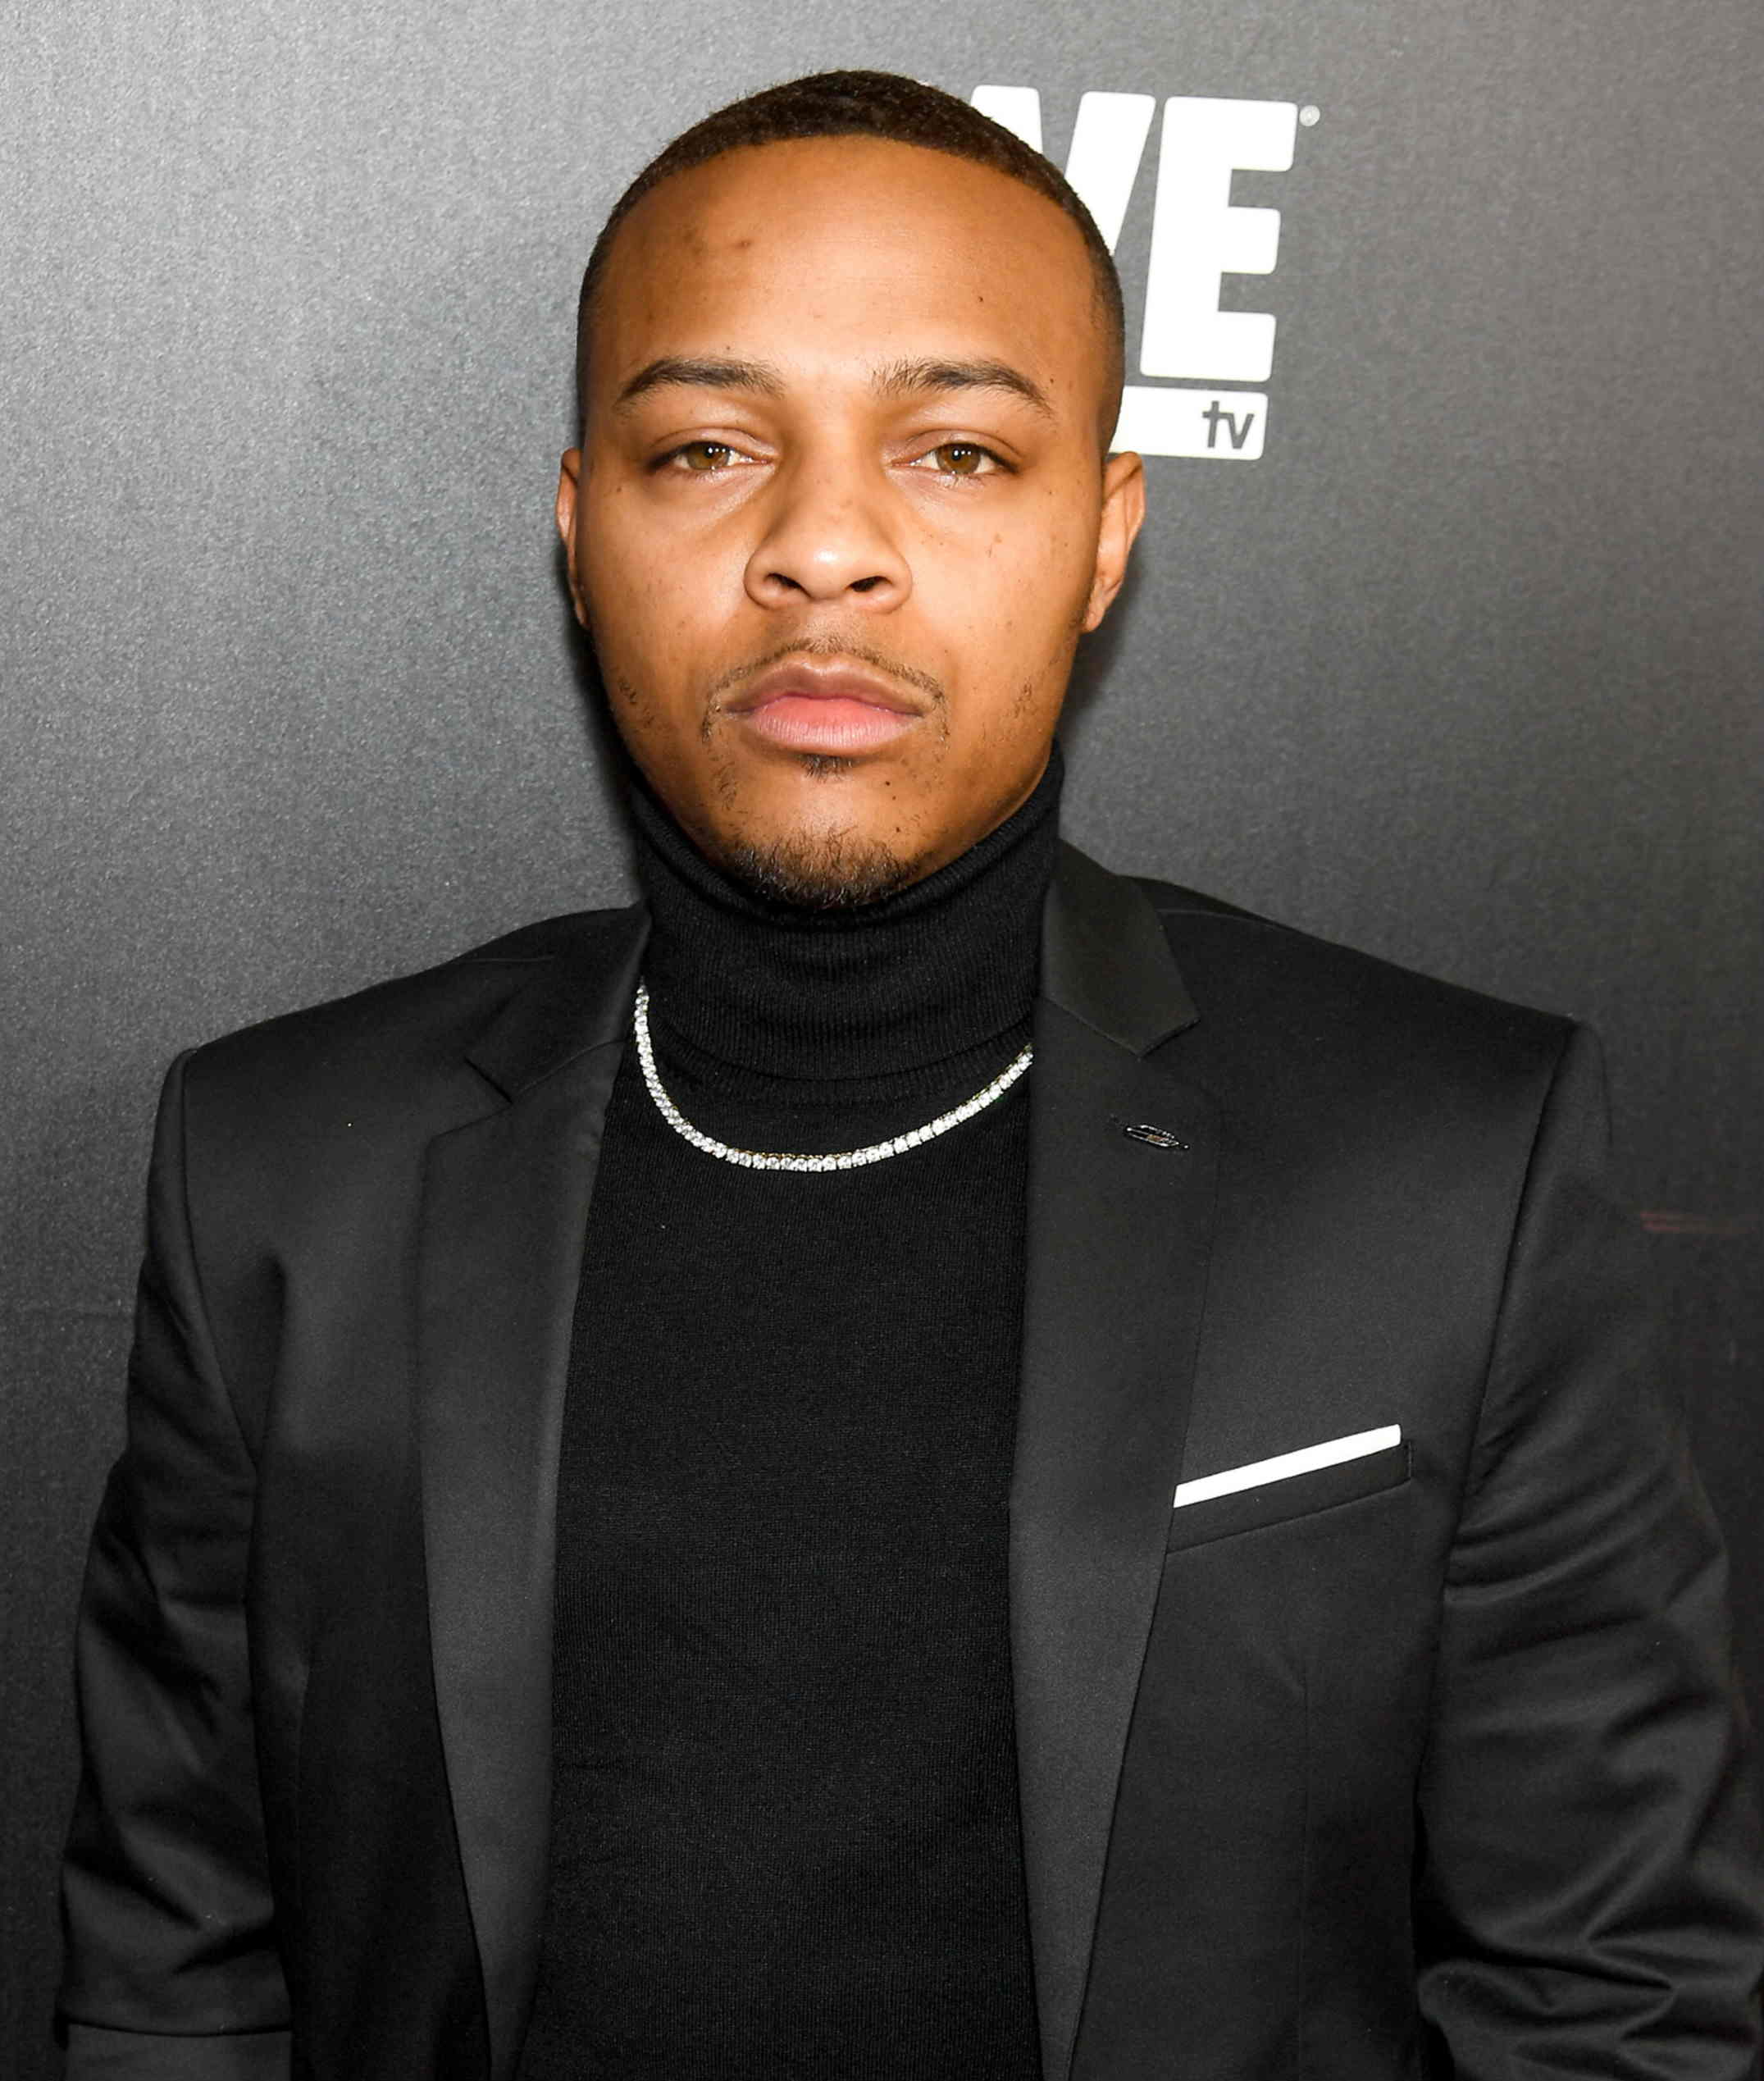 download bow wow 2022